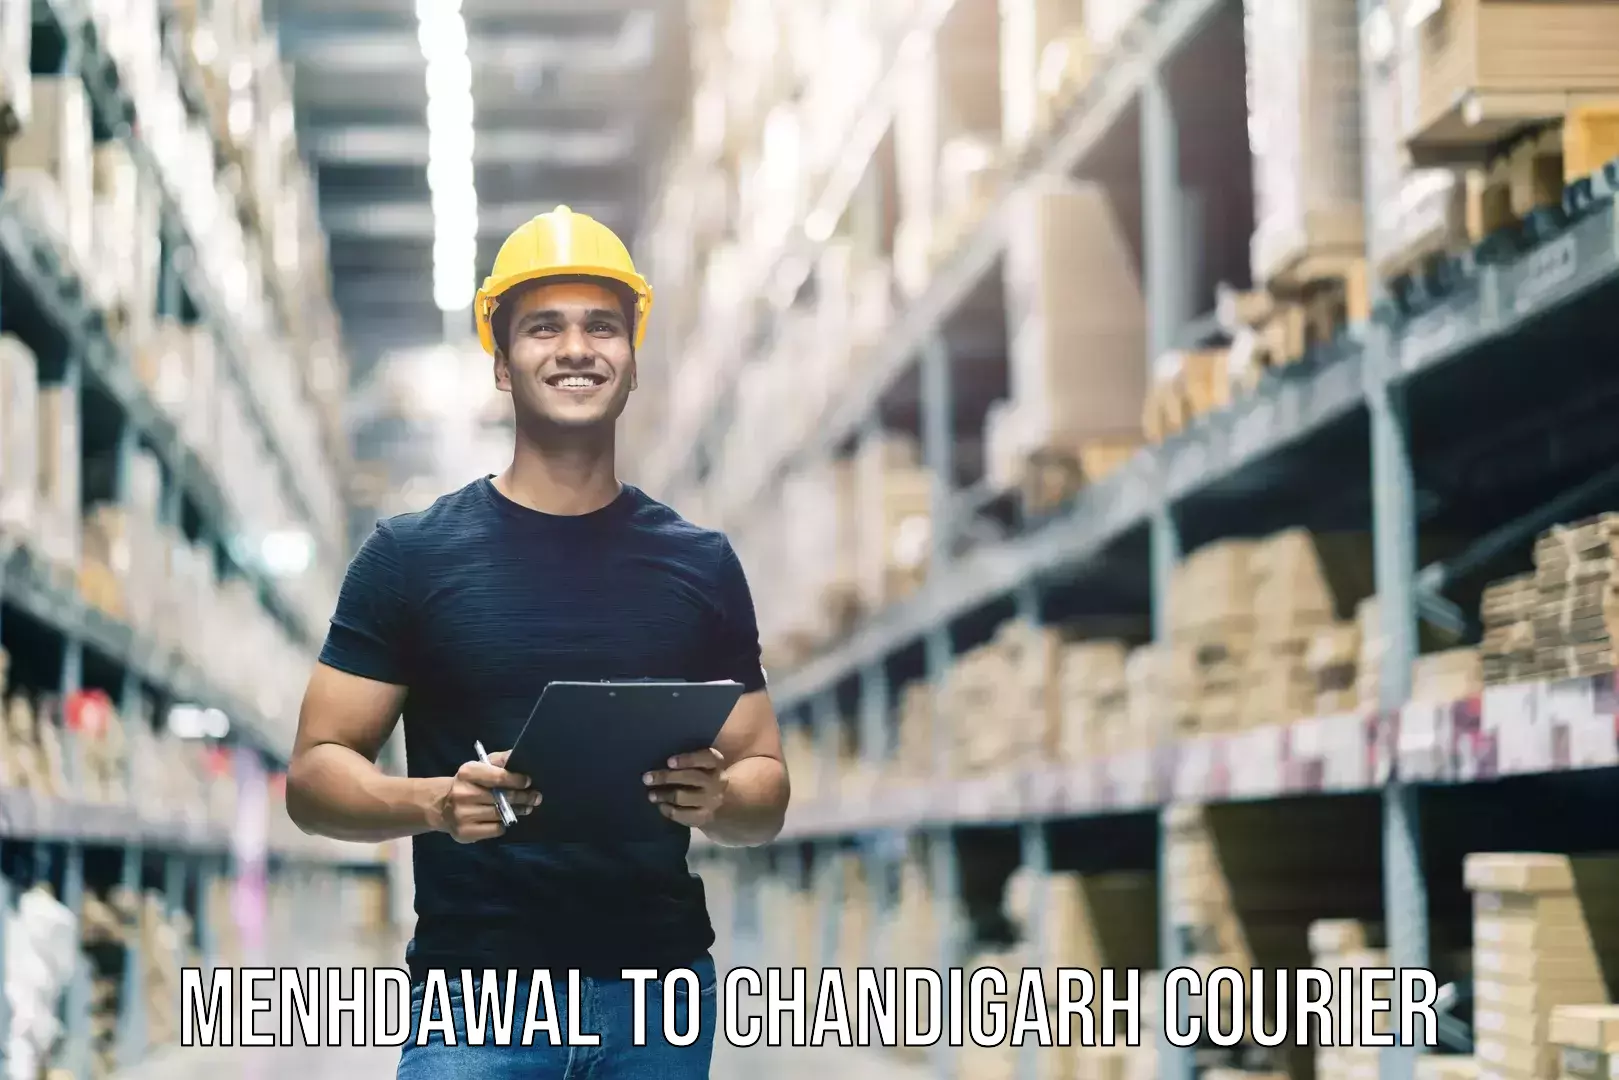 Baggage transport professionals Menhdawal to Chandigarh